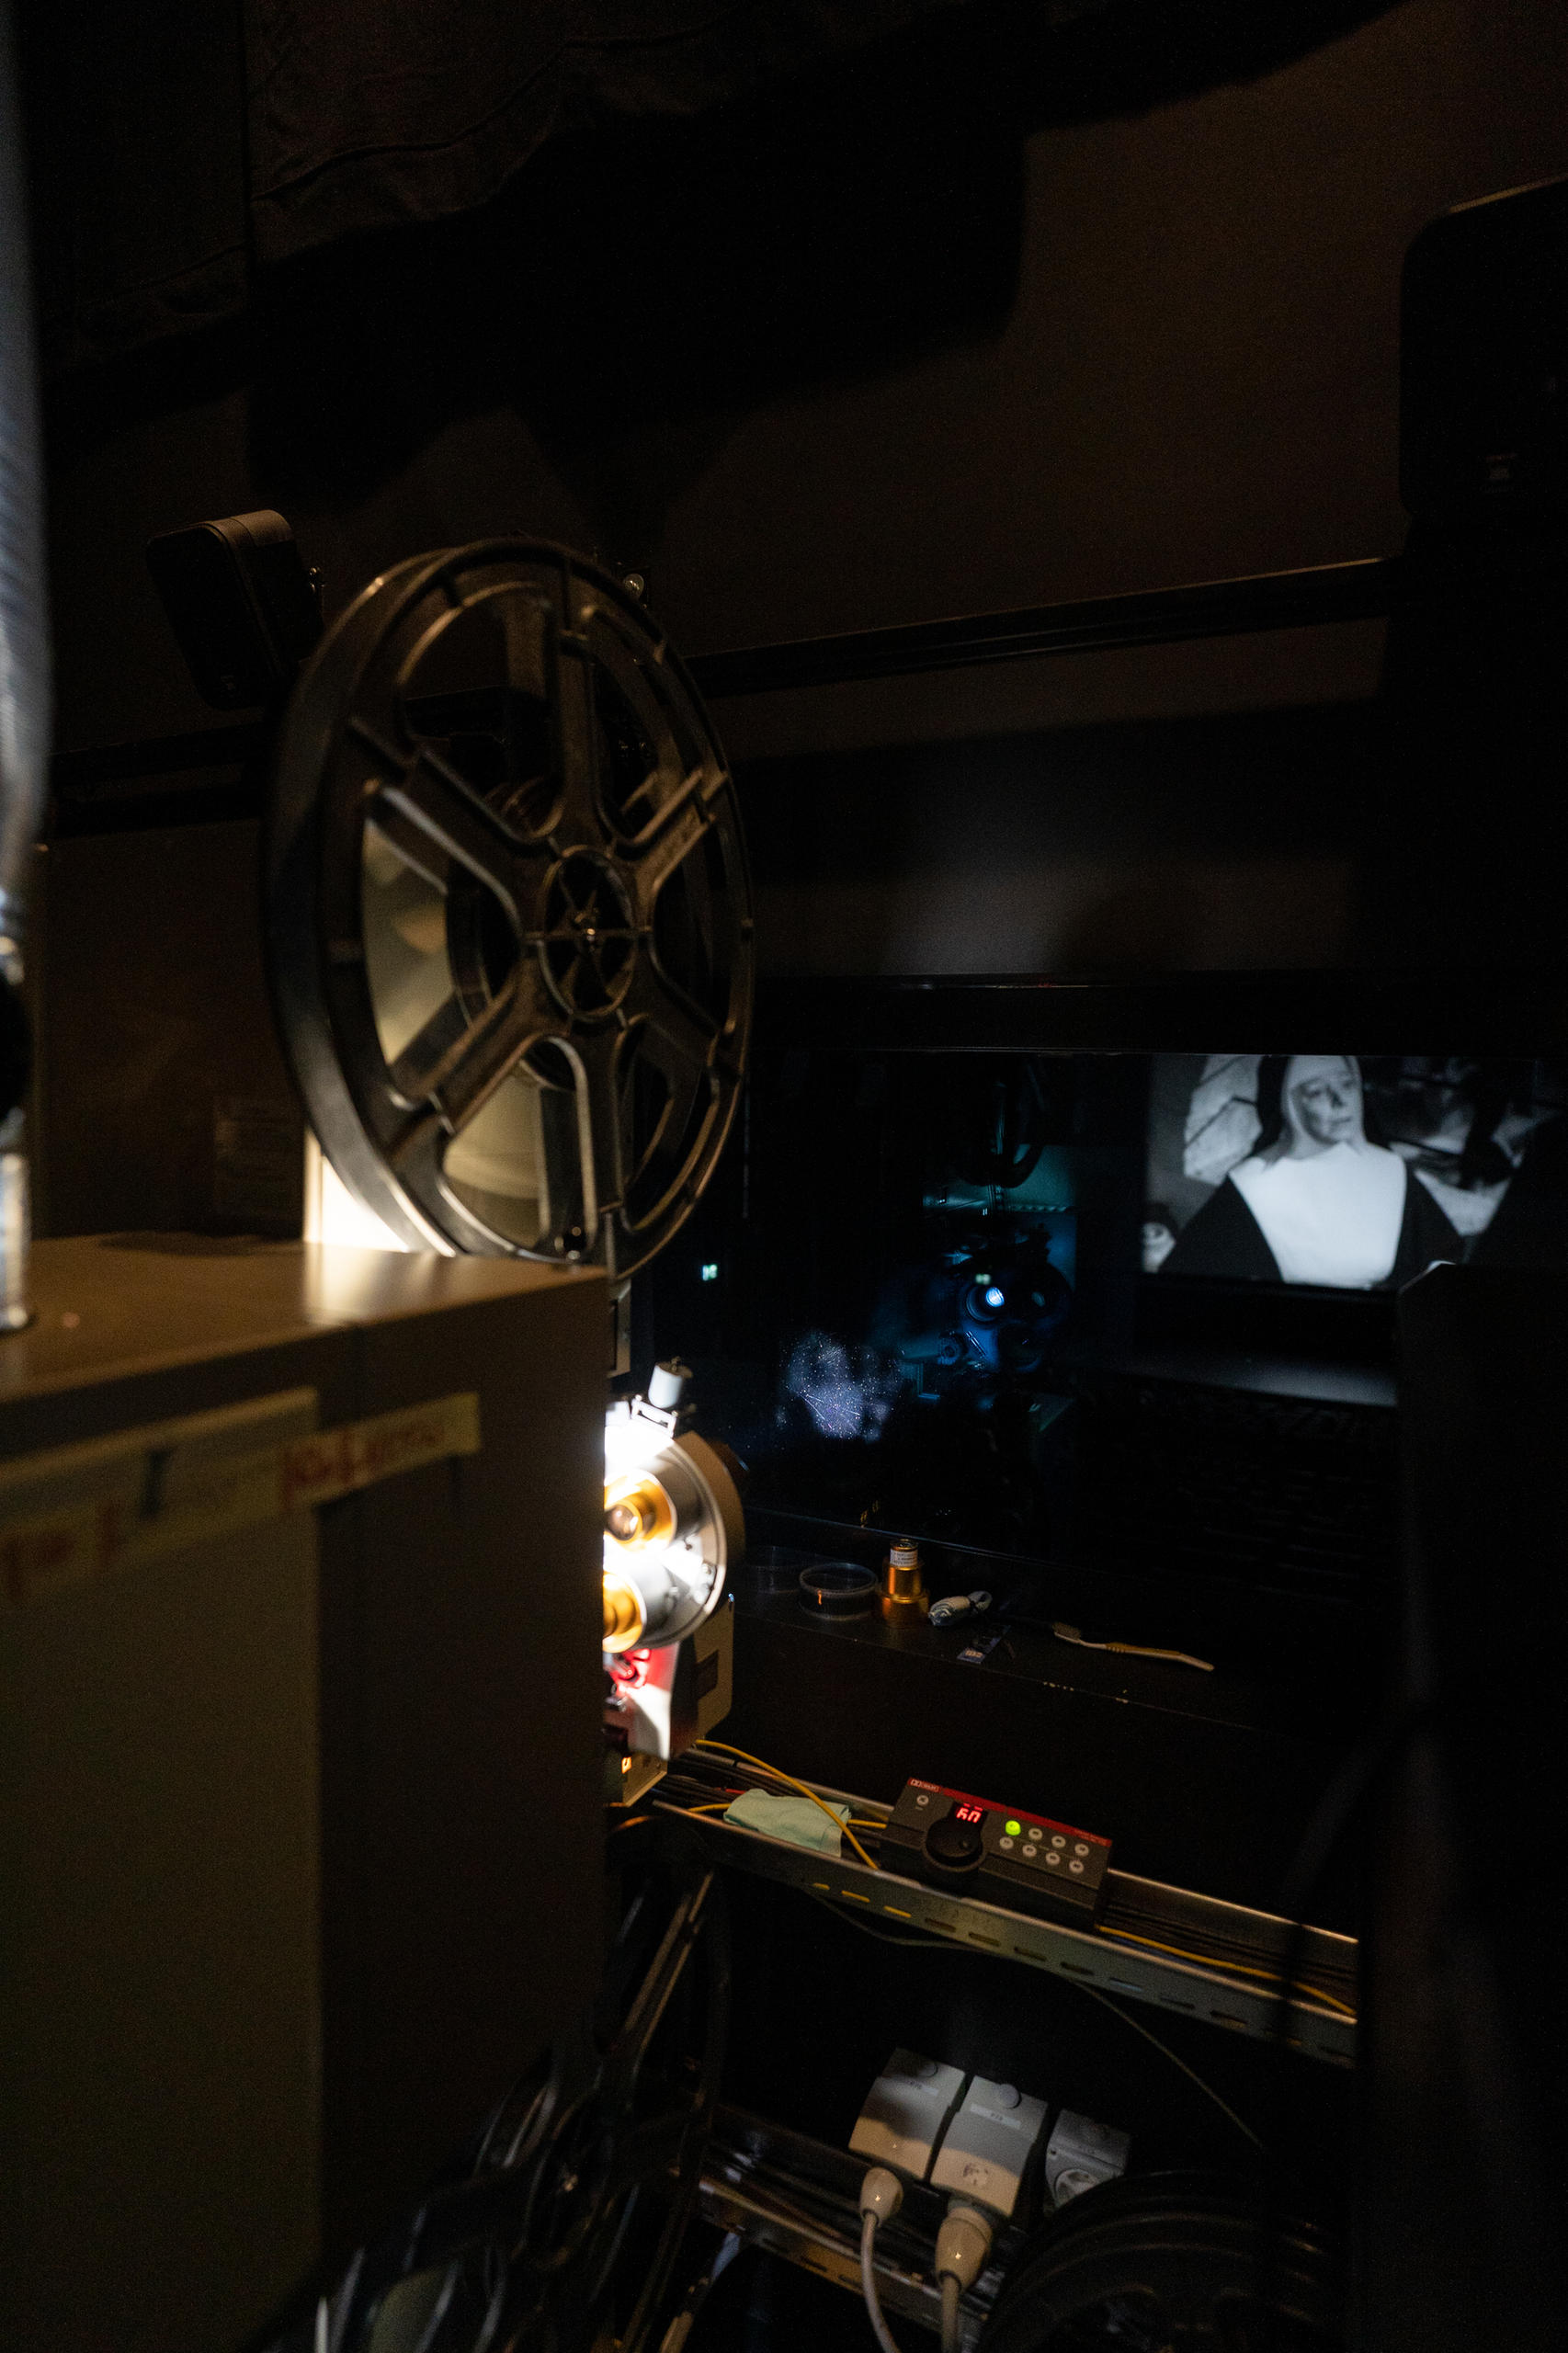 The film running through a Kinoton 35mm projector during the screening